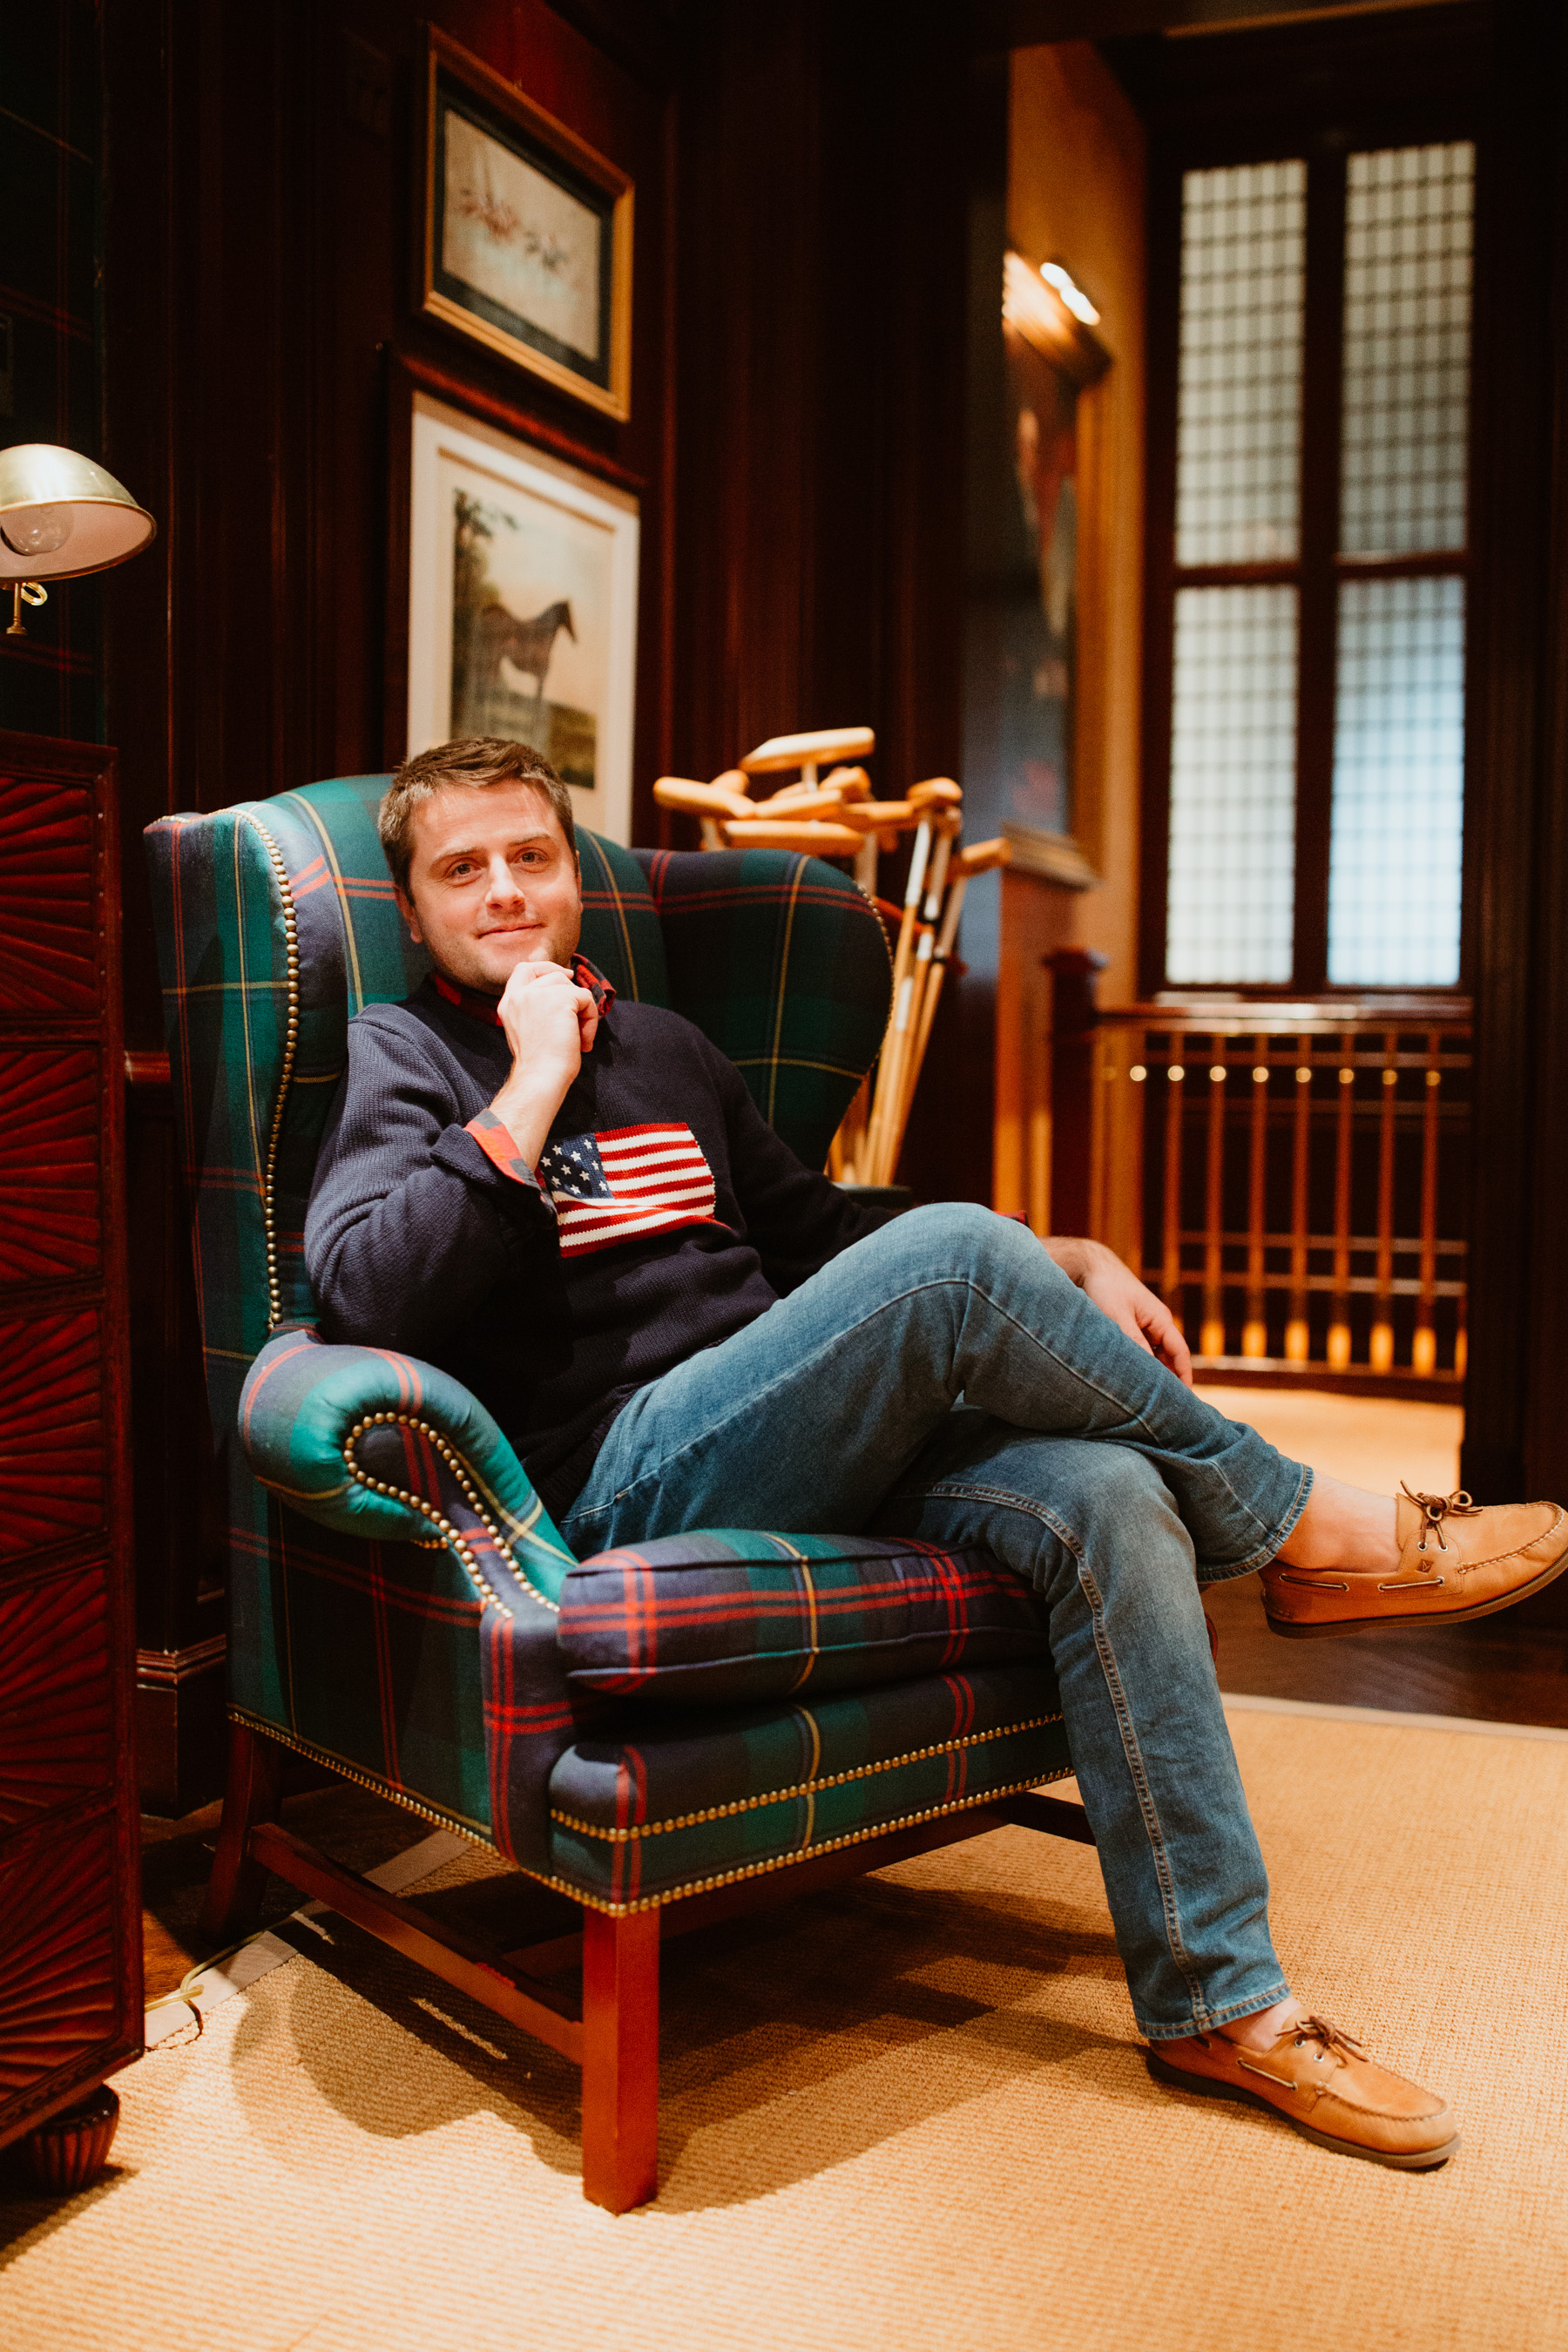 Mitch's Outfit: Ralph Lauren American Flag Sweater and Duffle Coat c/o